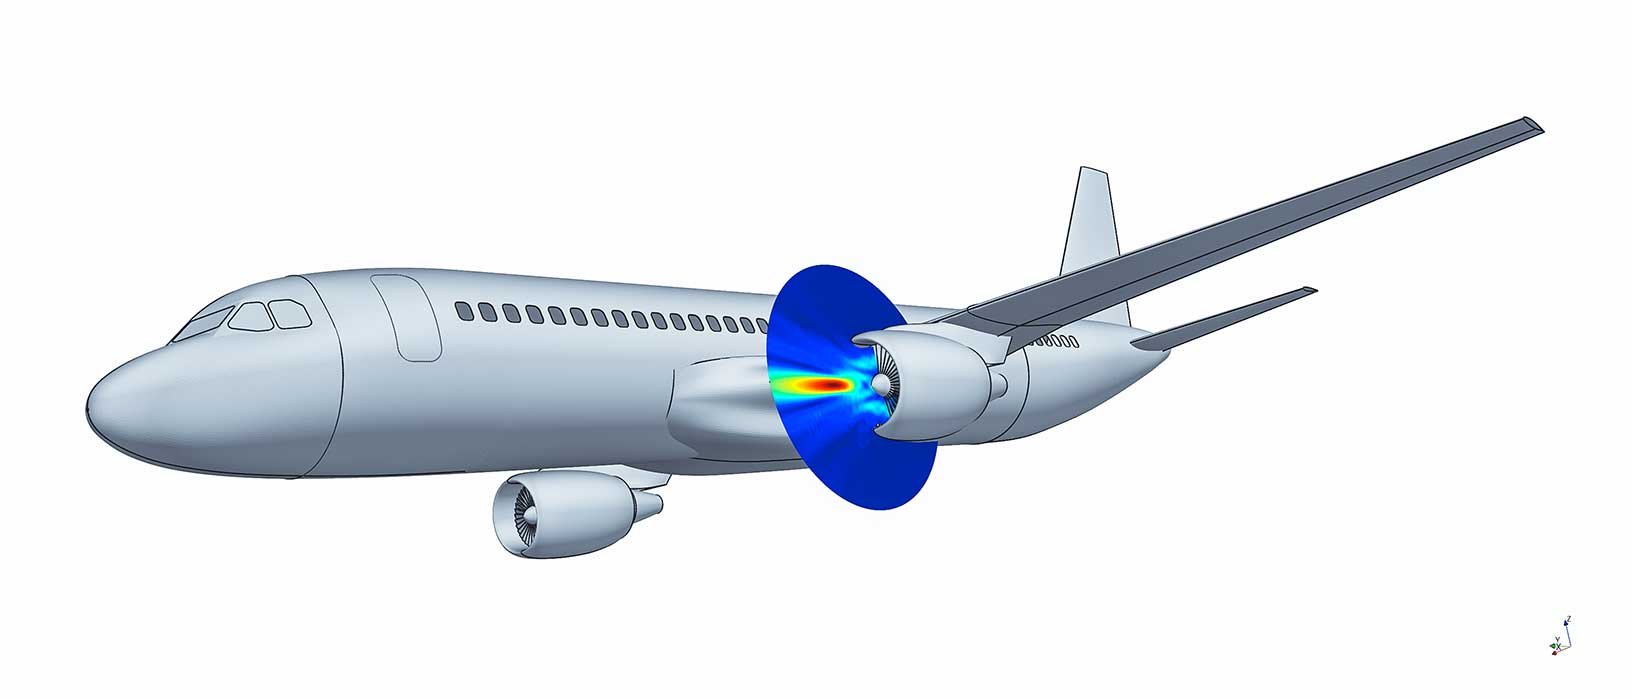 Acoustic simulation of aircraft engine noise